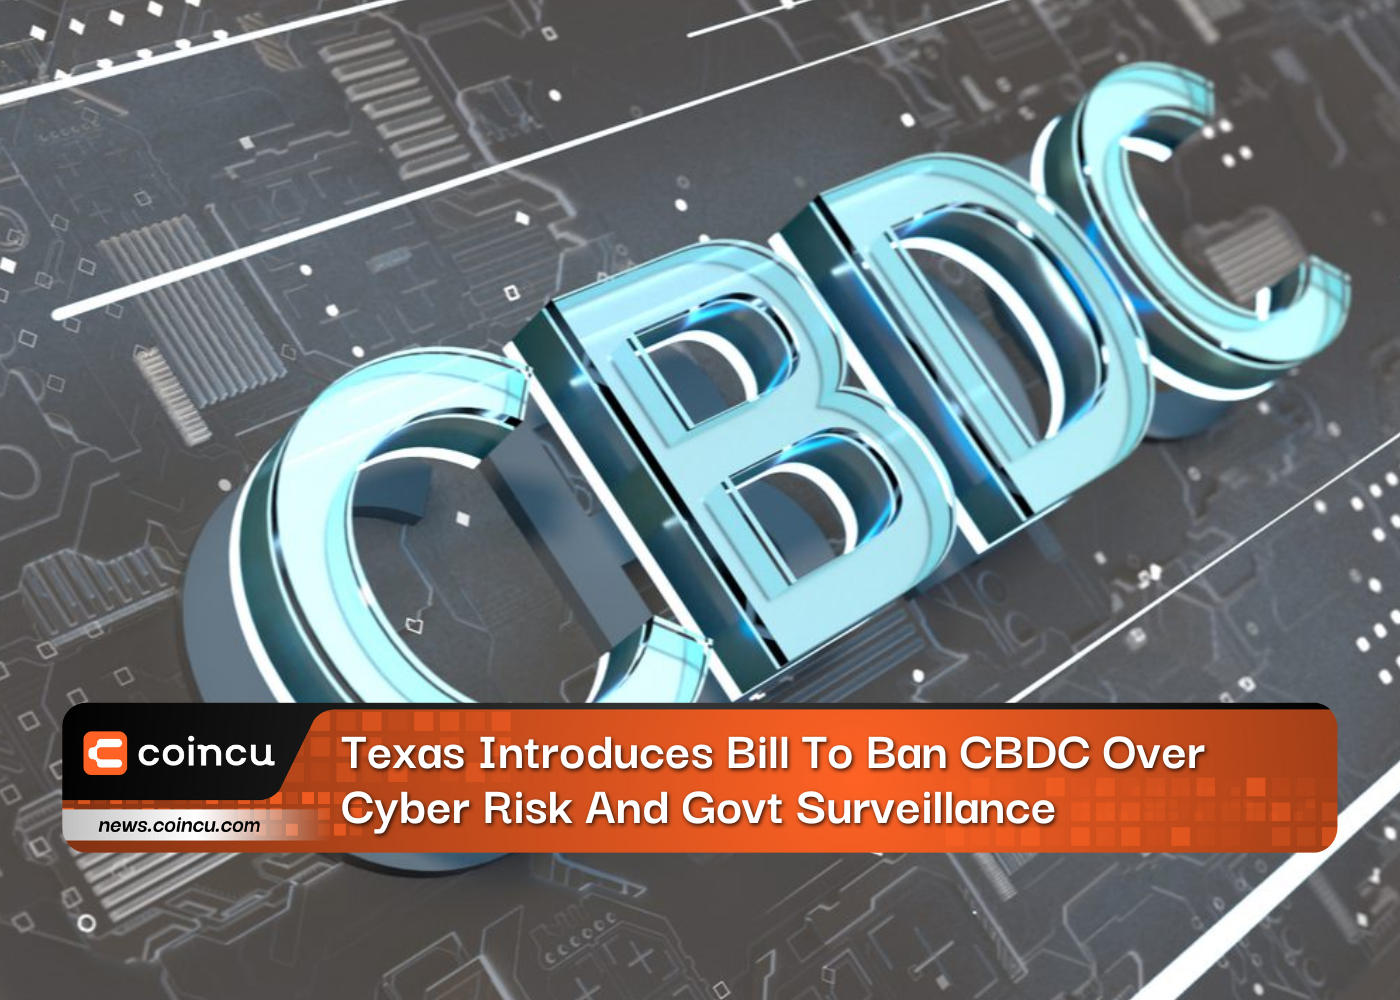 Texas Introduces Bill To Ban CBDC Over Cyber Risk And Govt Surveillance